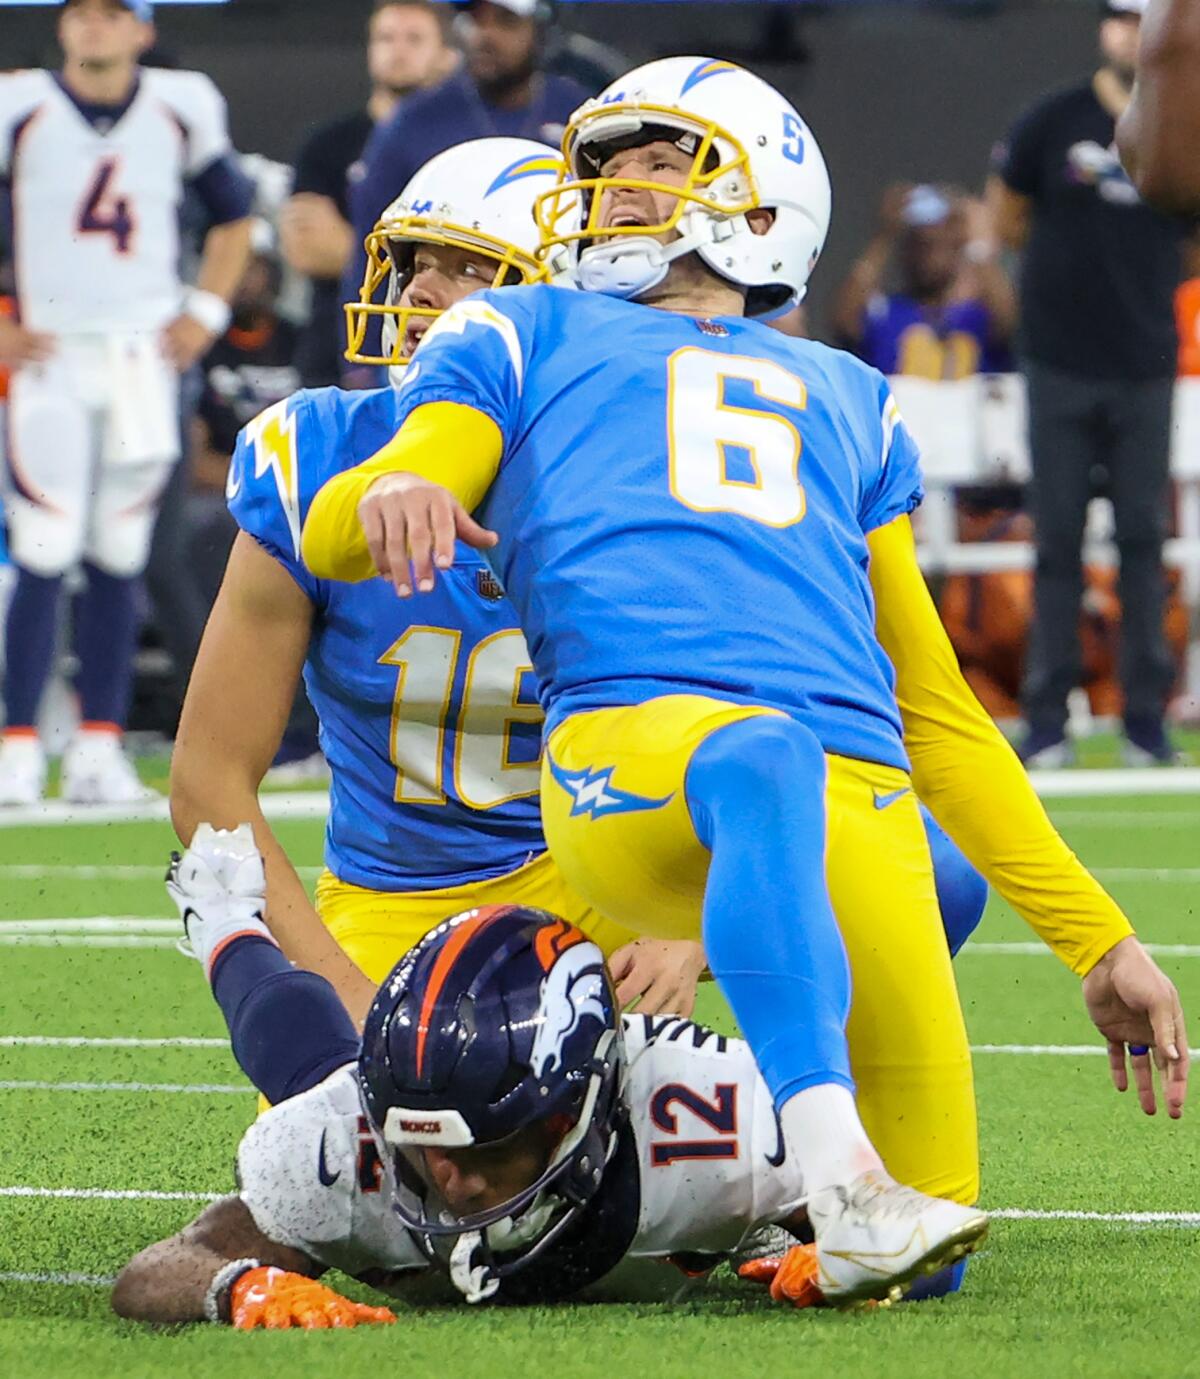 Injured Chargers kicker Dustin Hopkins (6) grimaces after making a game-winning field goal in overtime.